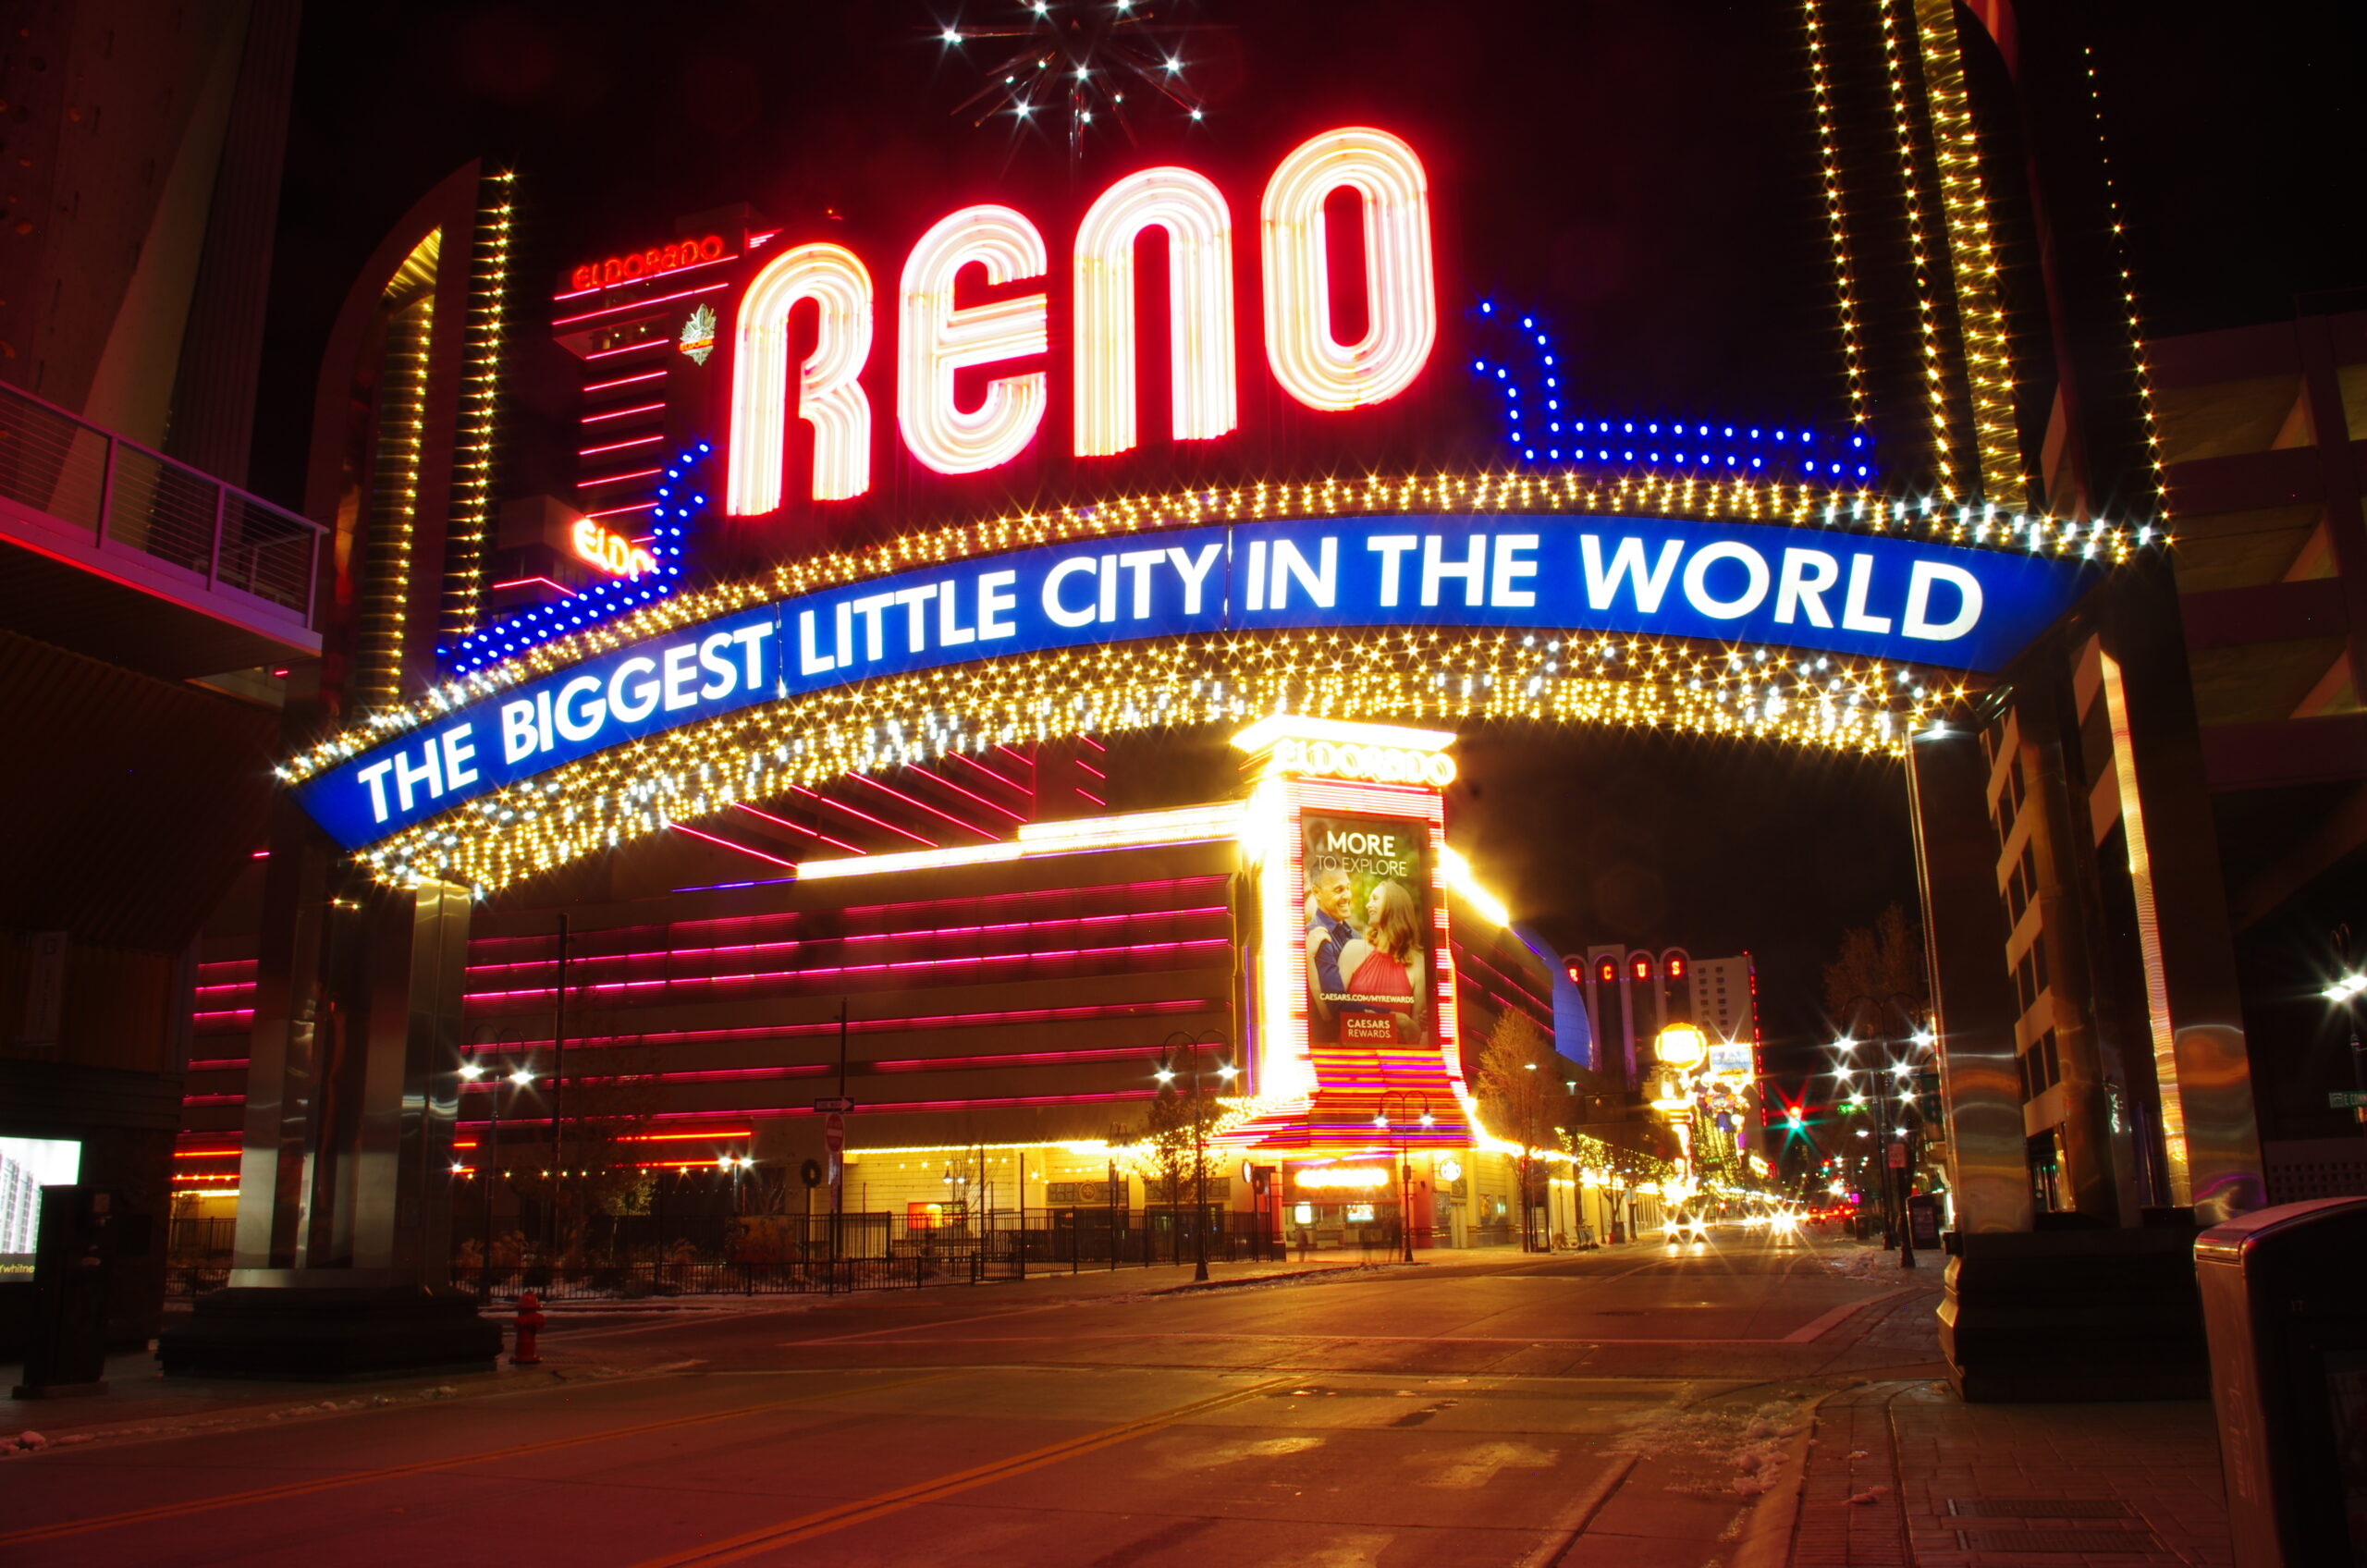 I took an arbitrary trip to Reno - I should not have gone